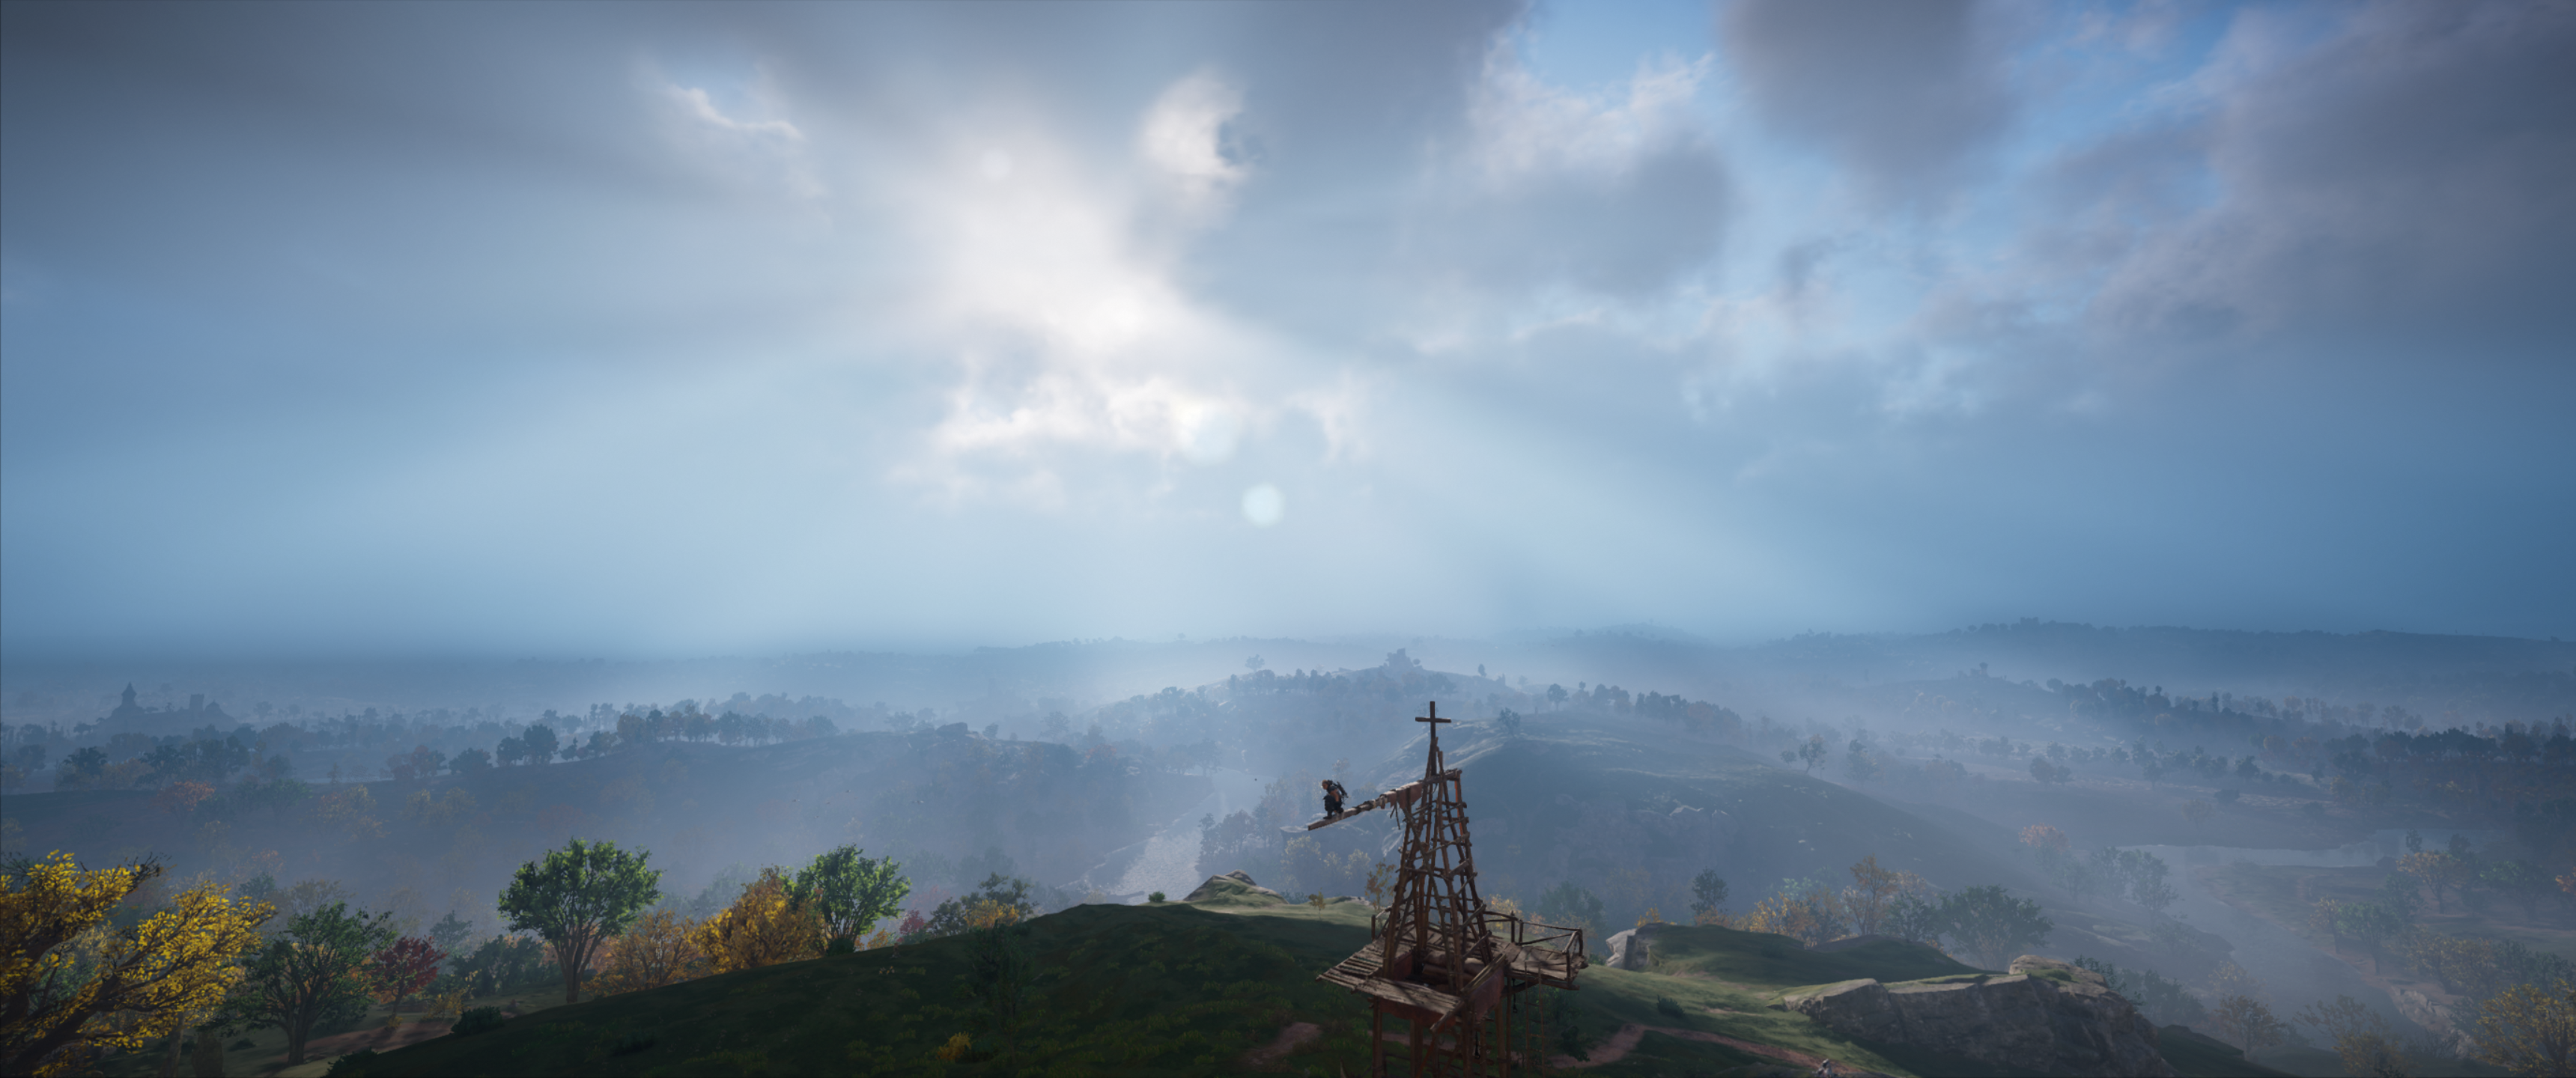 Assassins Creed Assassins Creed Valhalla Landscape Clouds Sun Structure Blue Trees Flag Green Yellow 3440x1440